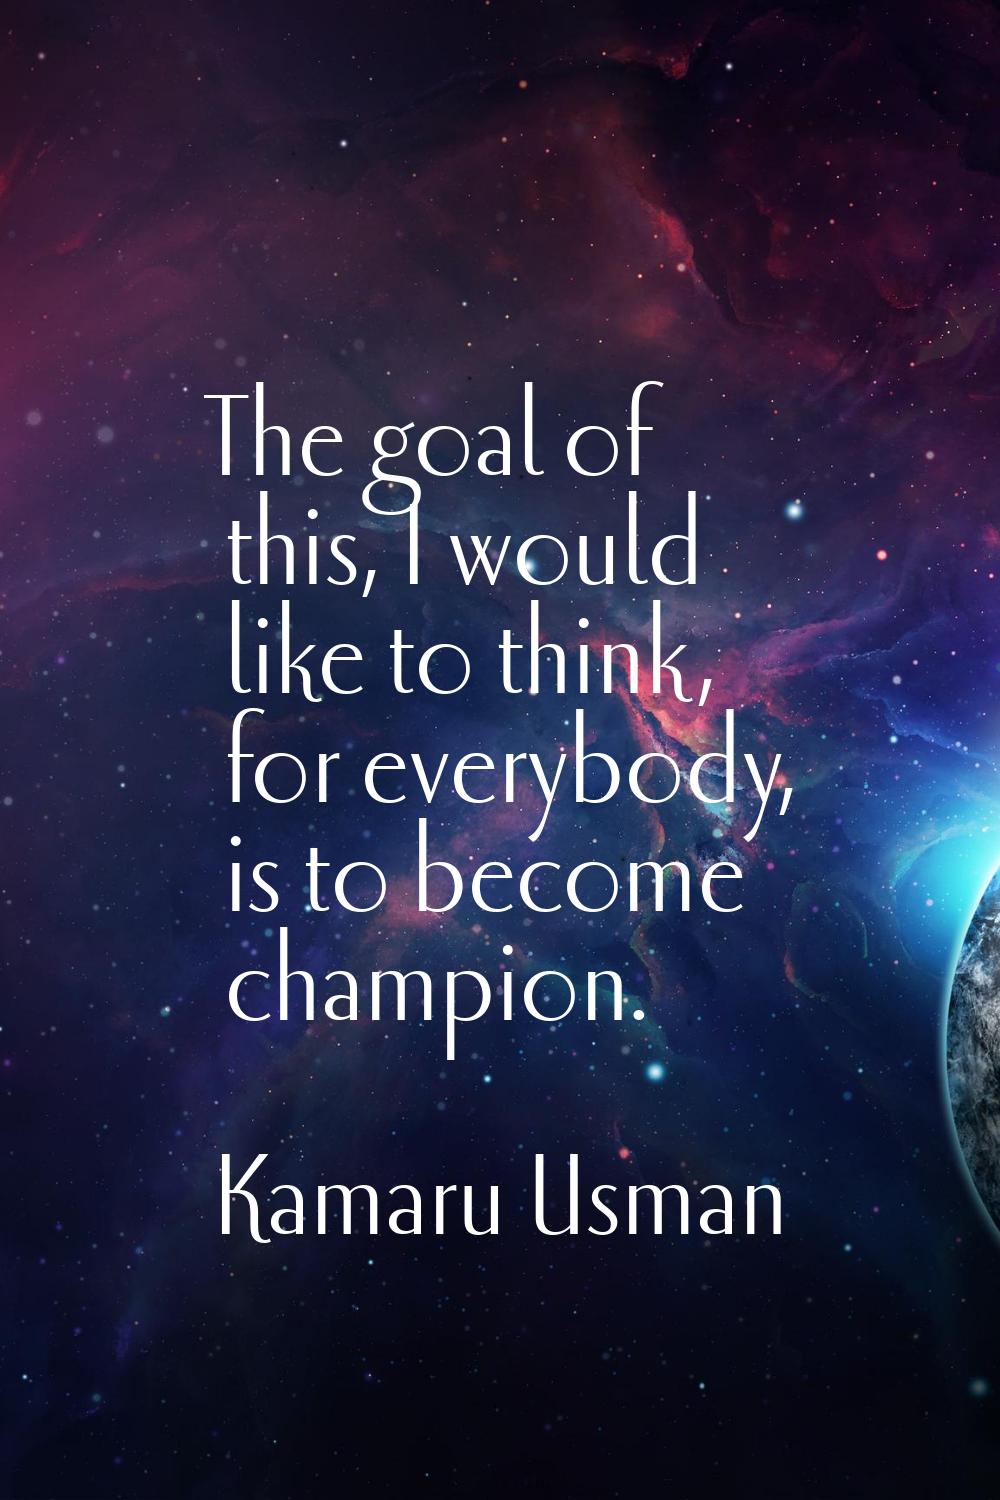 The goal of this, I would like to think, for everybody, is to become champion.